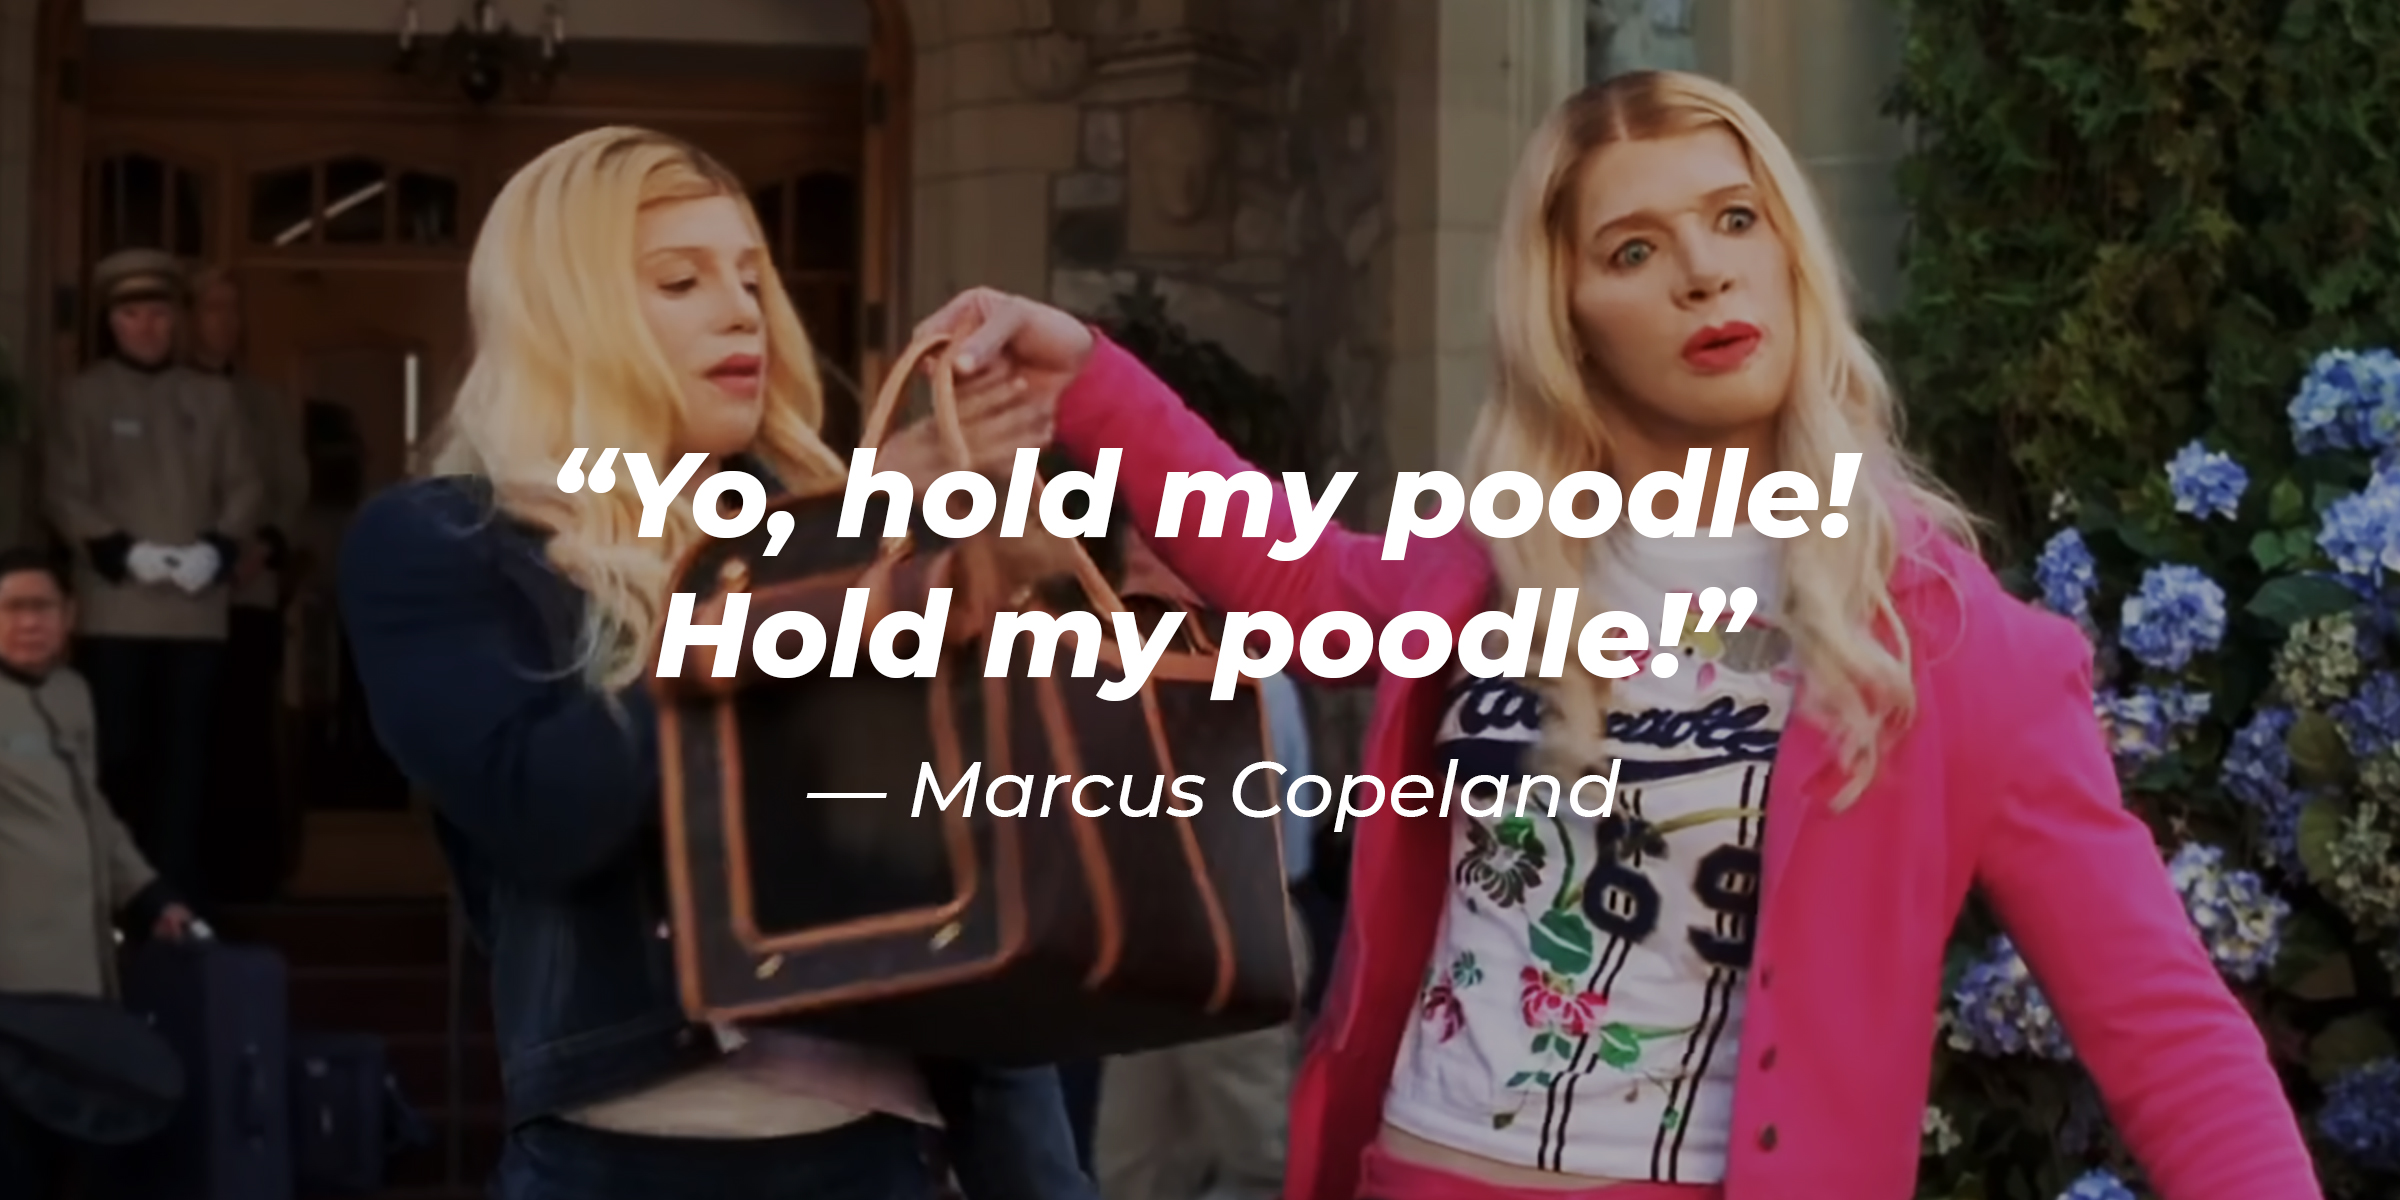 Marcus and Kevin Copeland in their undercover disguises with Marcus’s quote: “Yo, hold my poodle! Hold my poodle!” | Source: Sony Pictures Entertainment